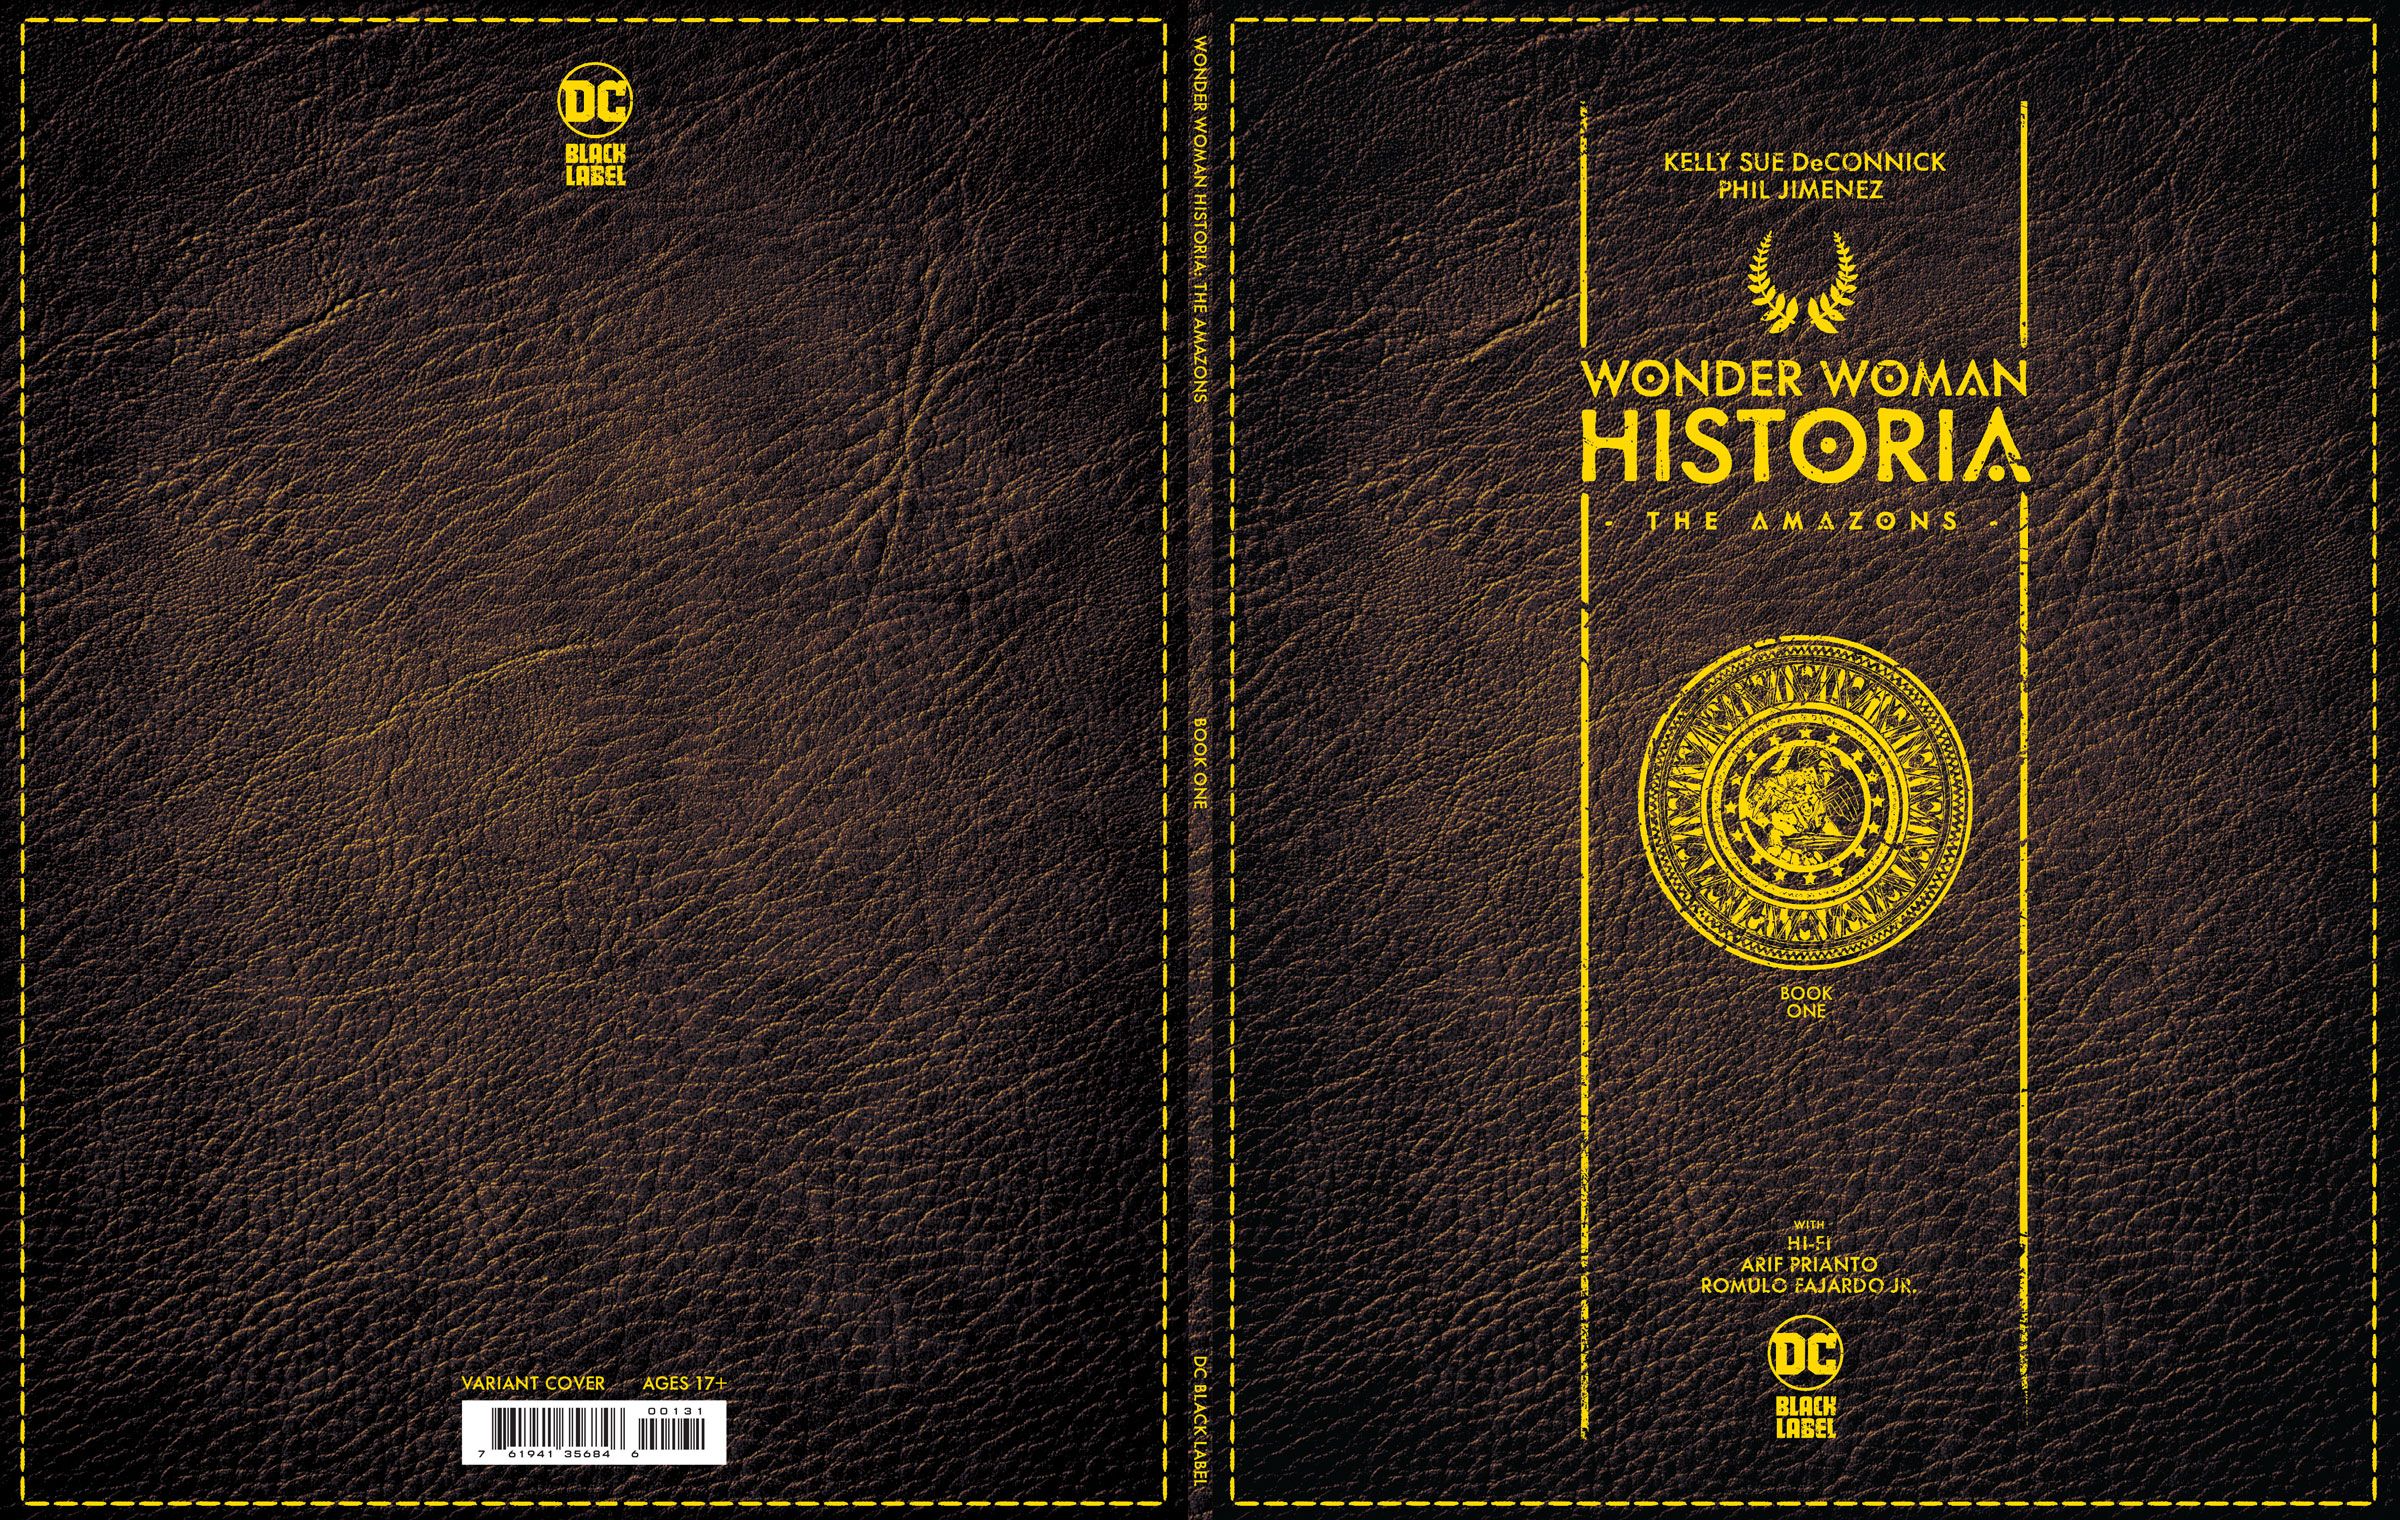 The variant cover for Wonder Woman Historia: The Amazons #1 appears like a leather-bound book.